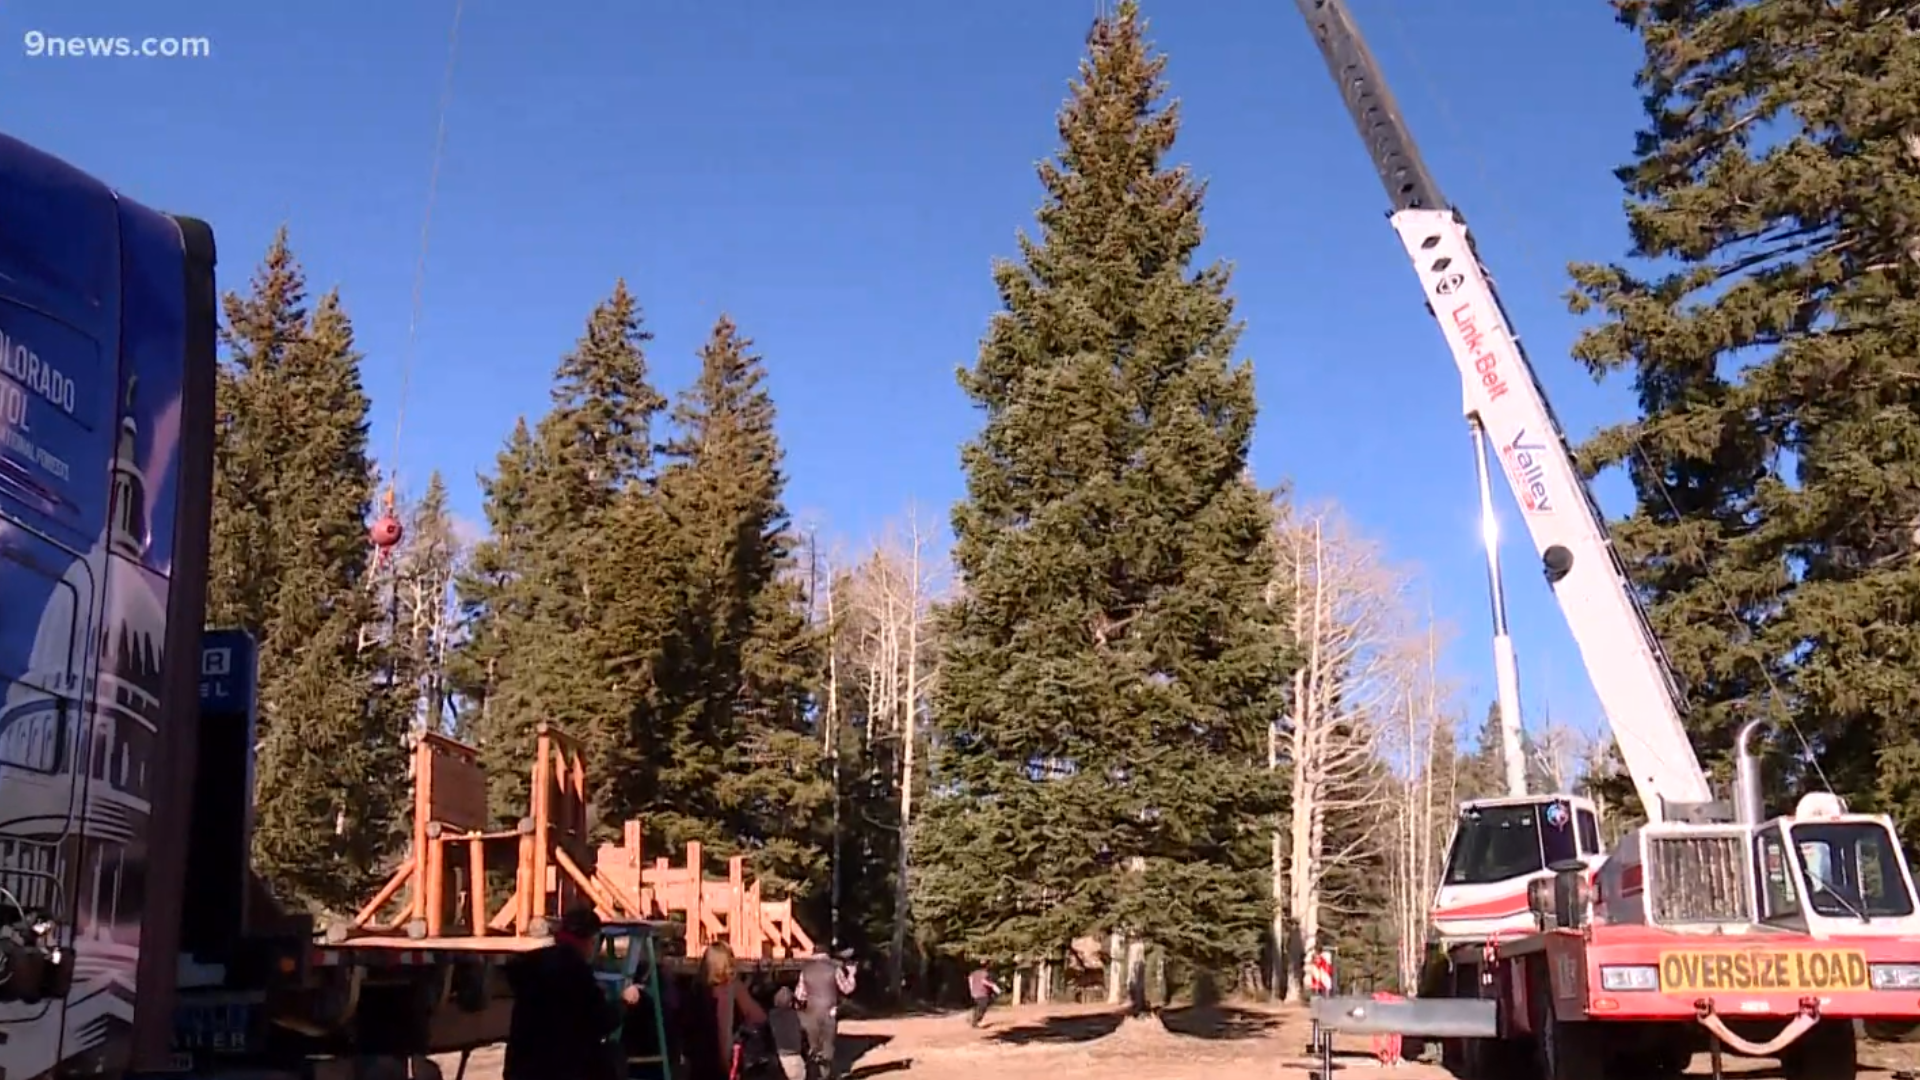 A tree cutting ceremony took place at 2:30 p.m.